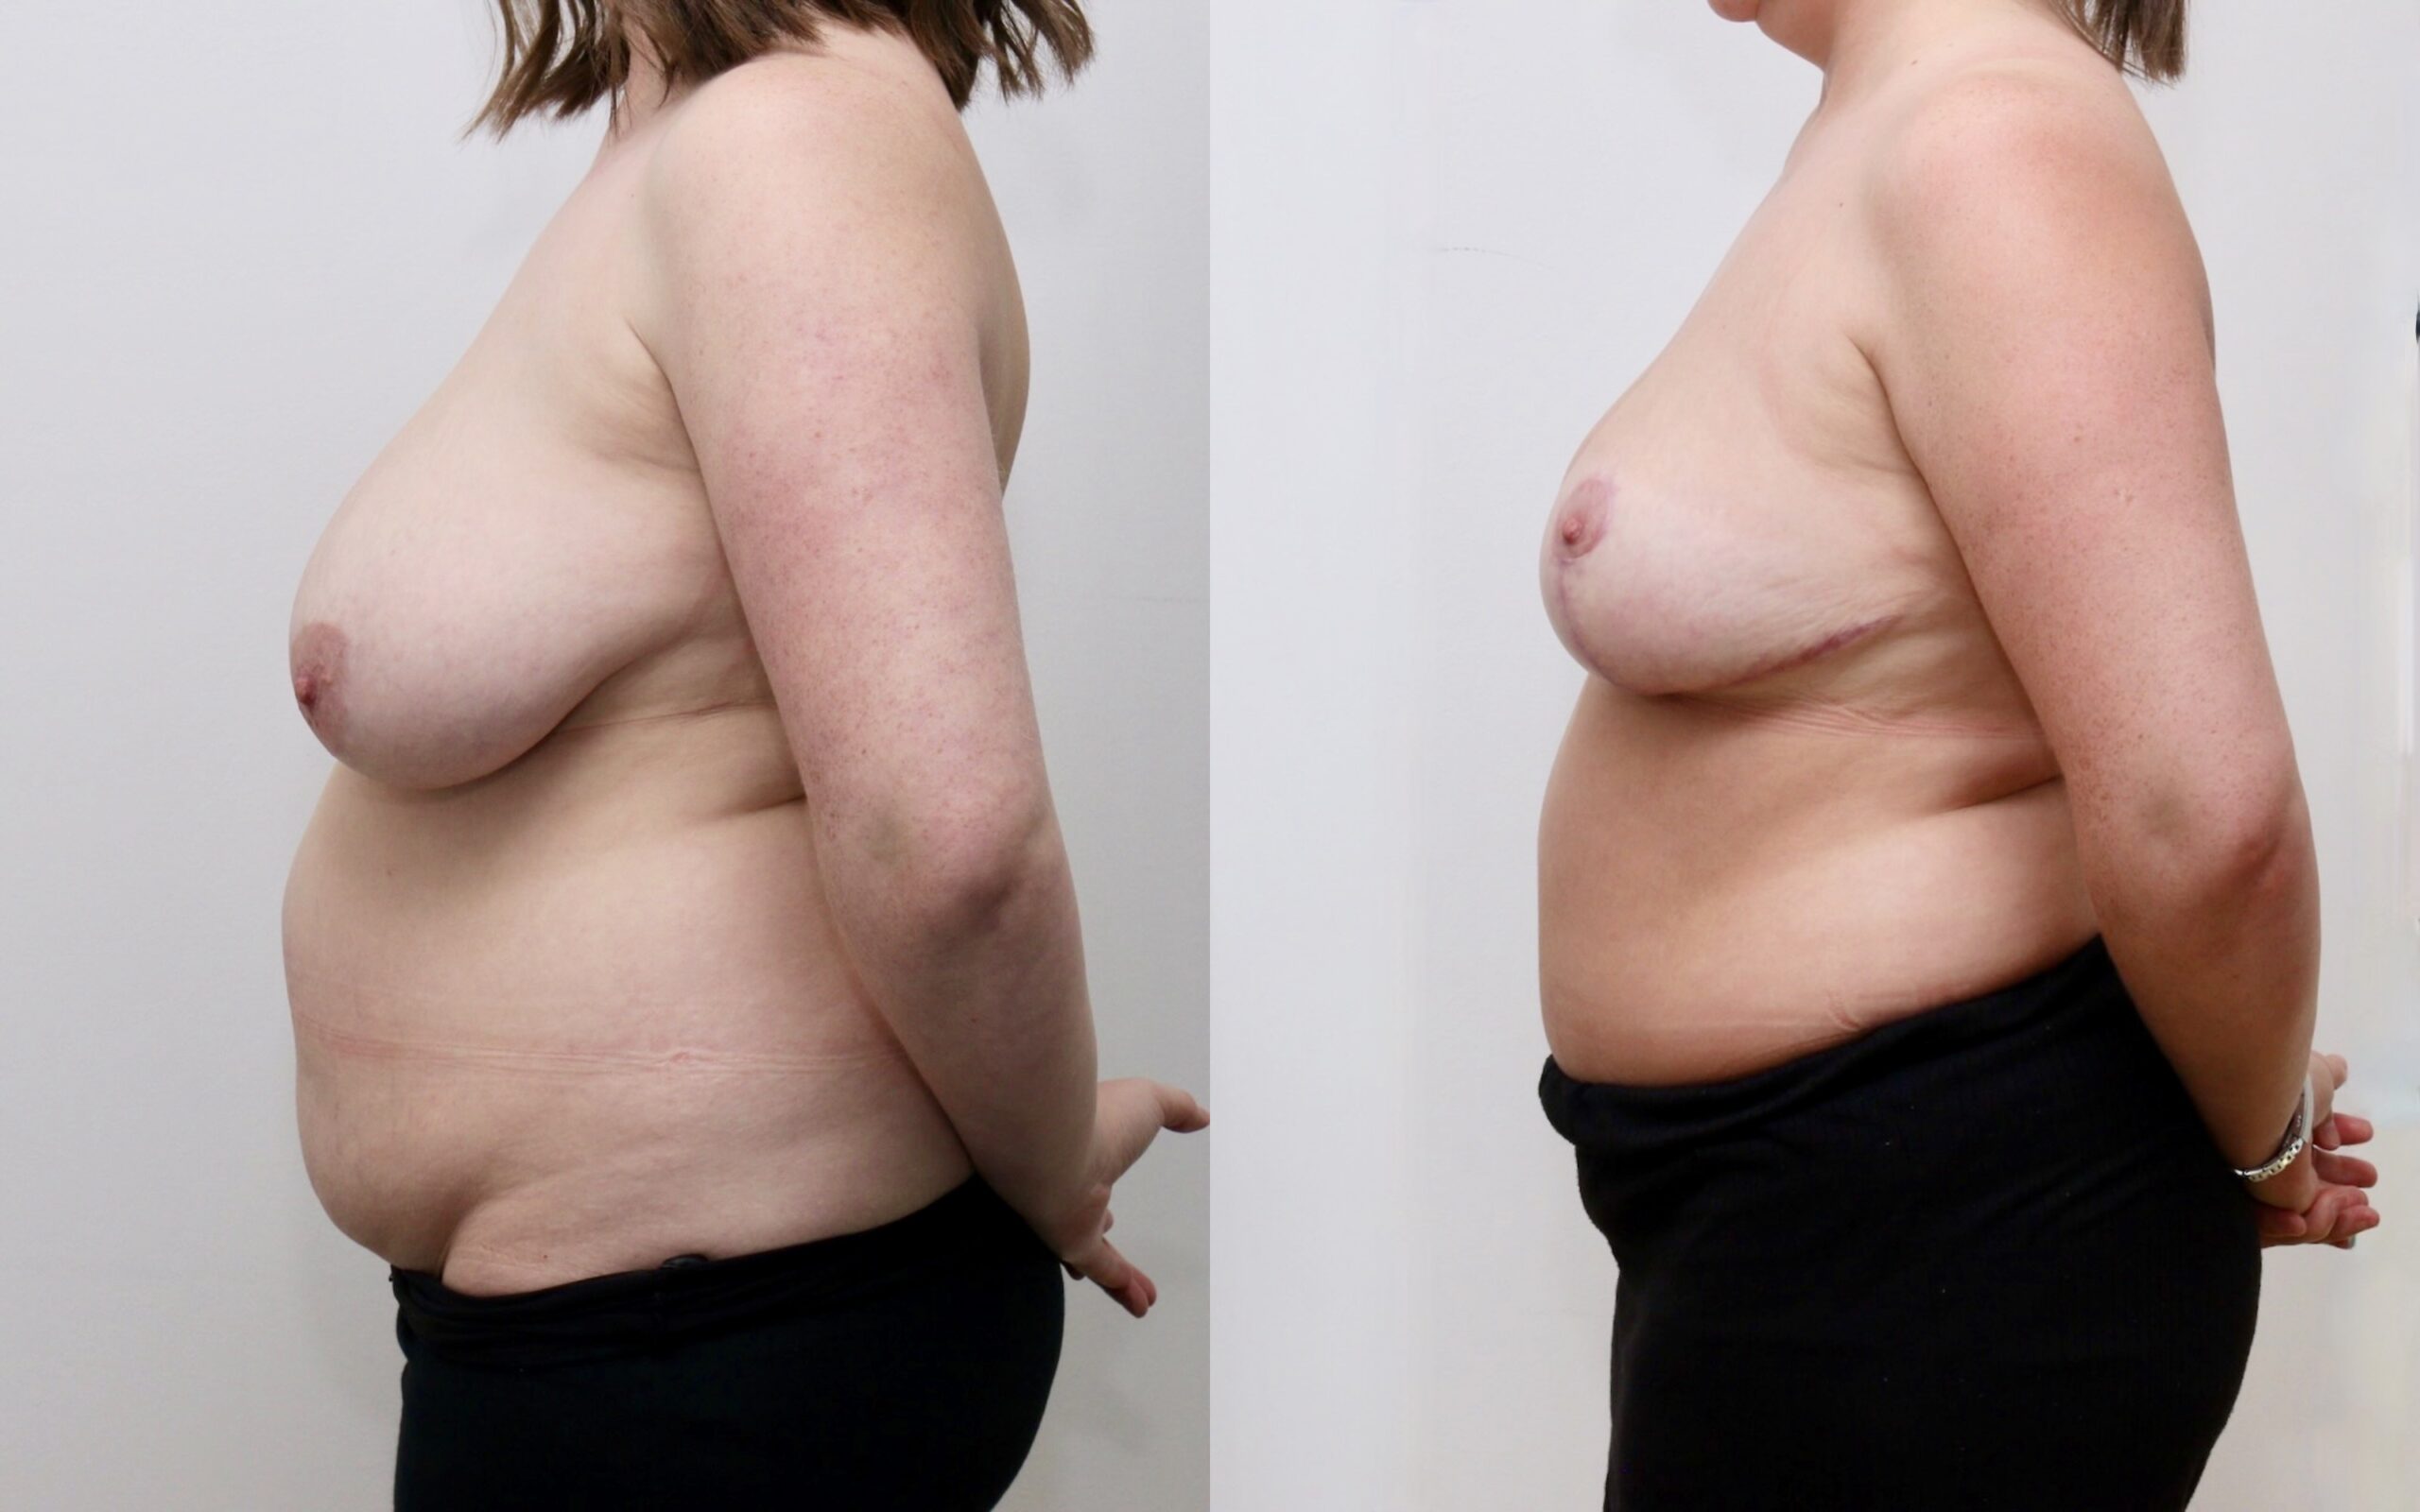 Tummy tuck and small breast reduction/ uplift